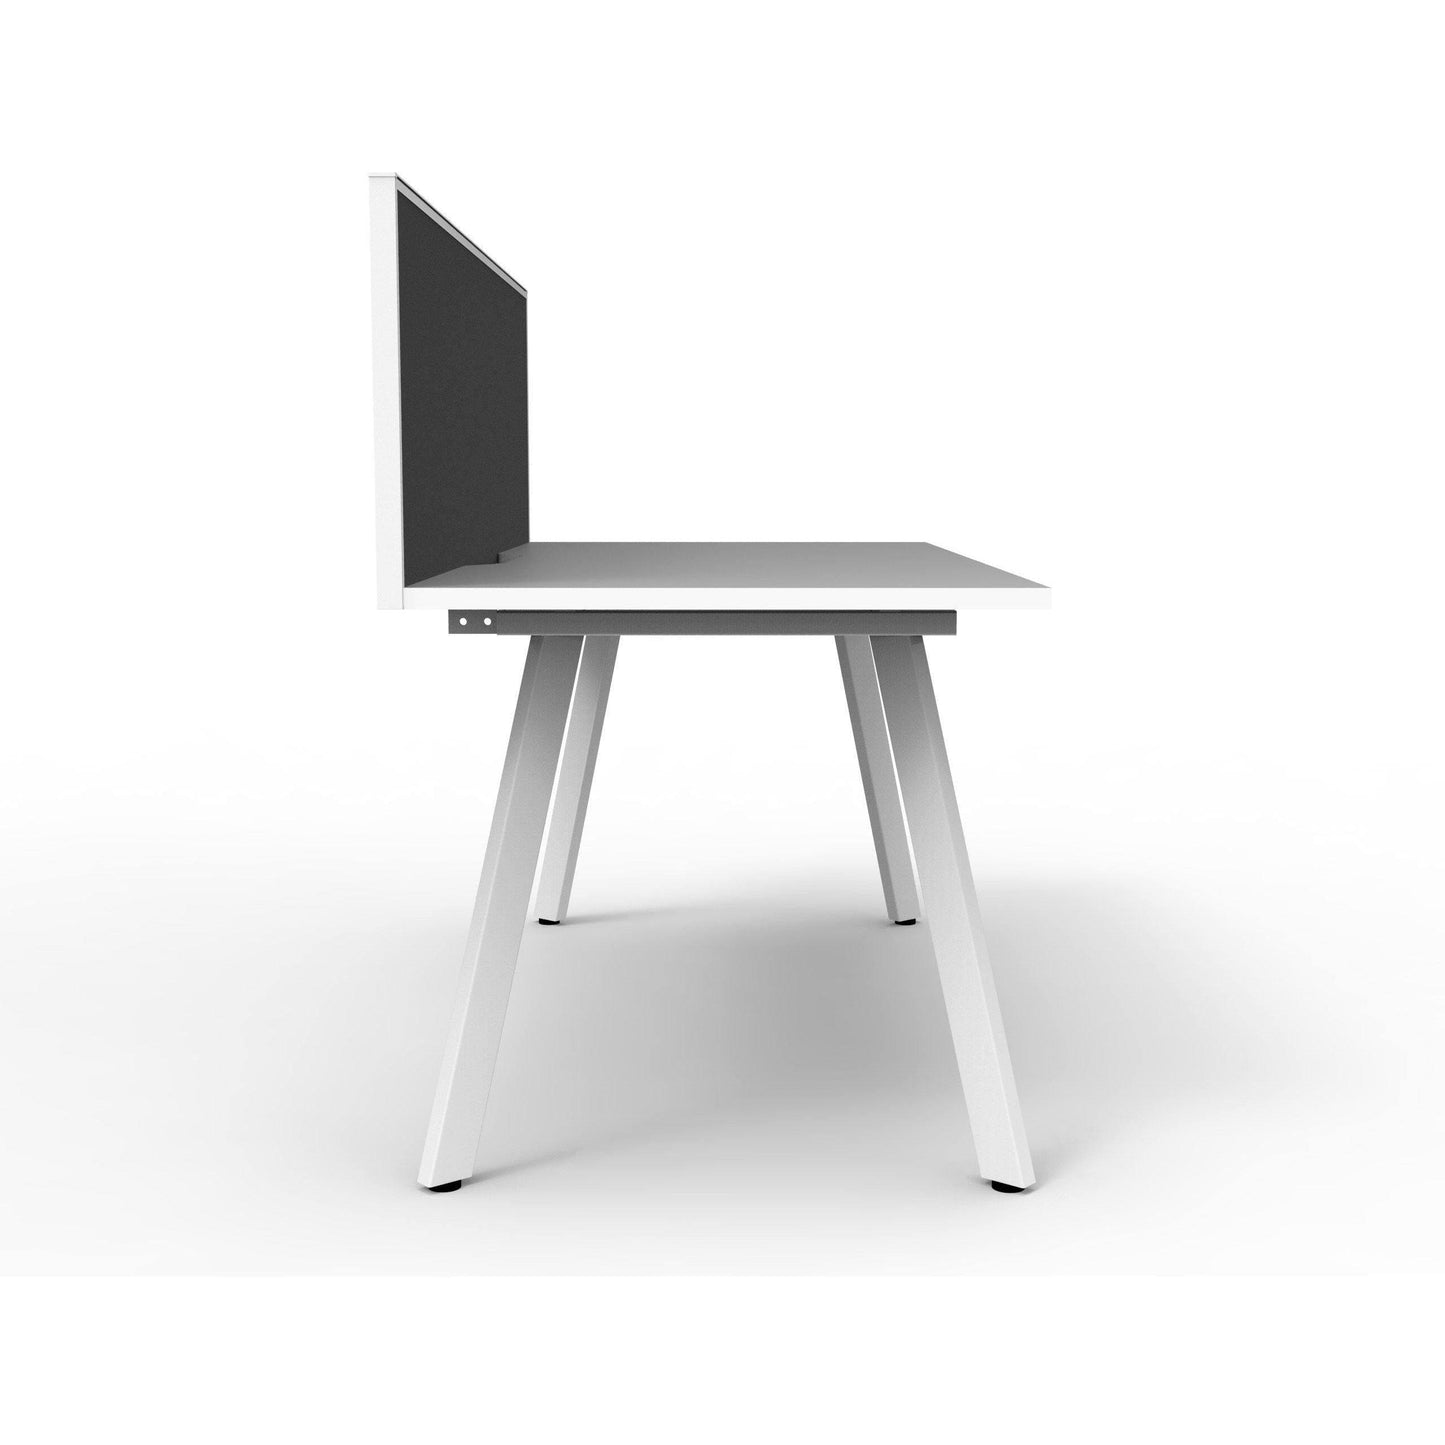 Eternity Single Straight Desk with Screen (White Worktop) - Office Furniture Company 